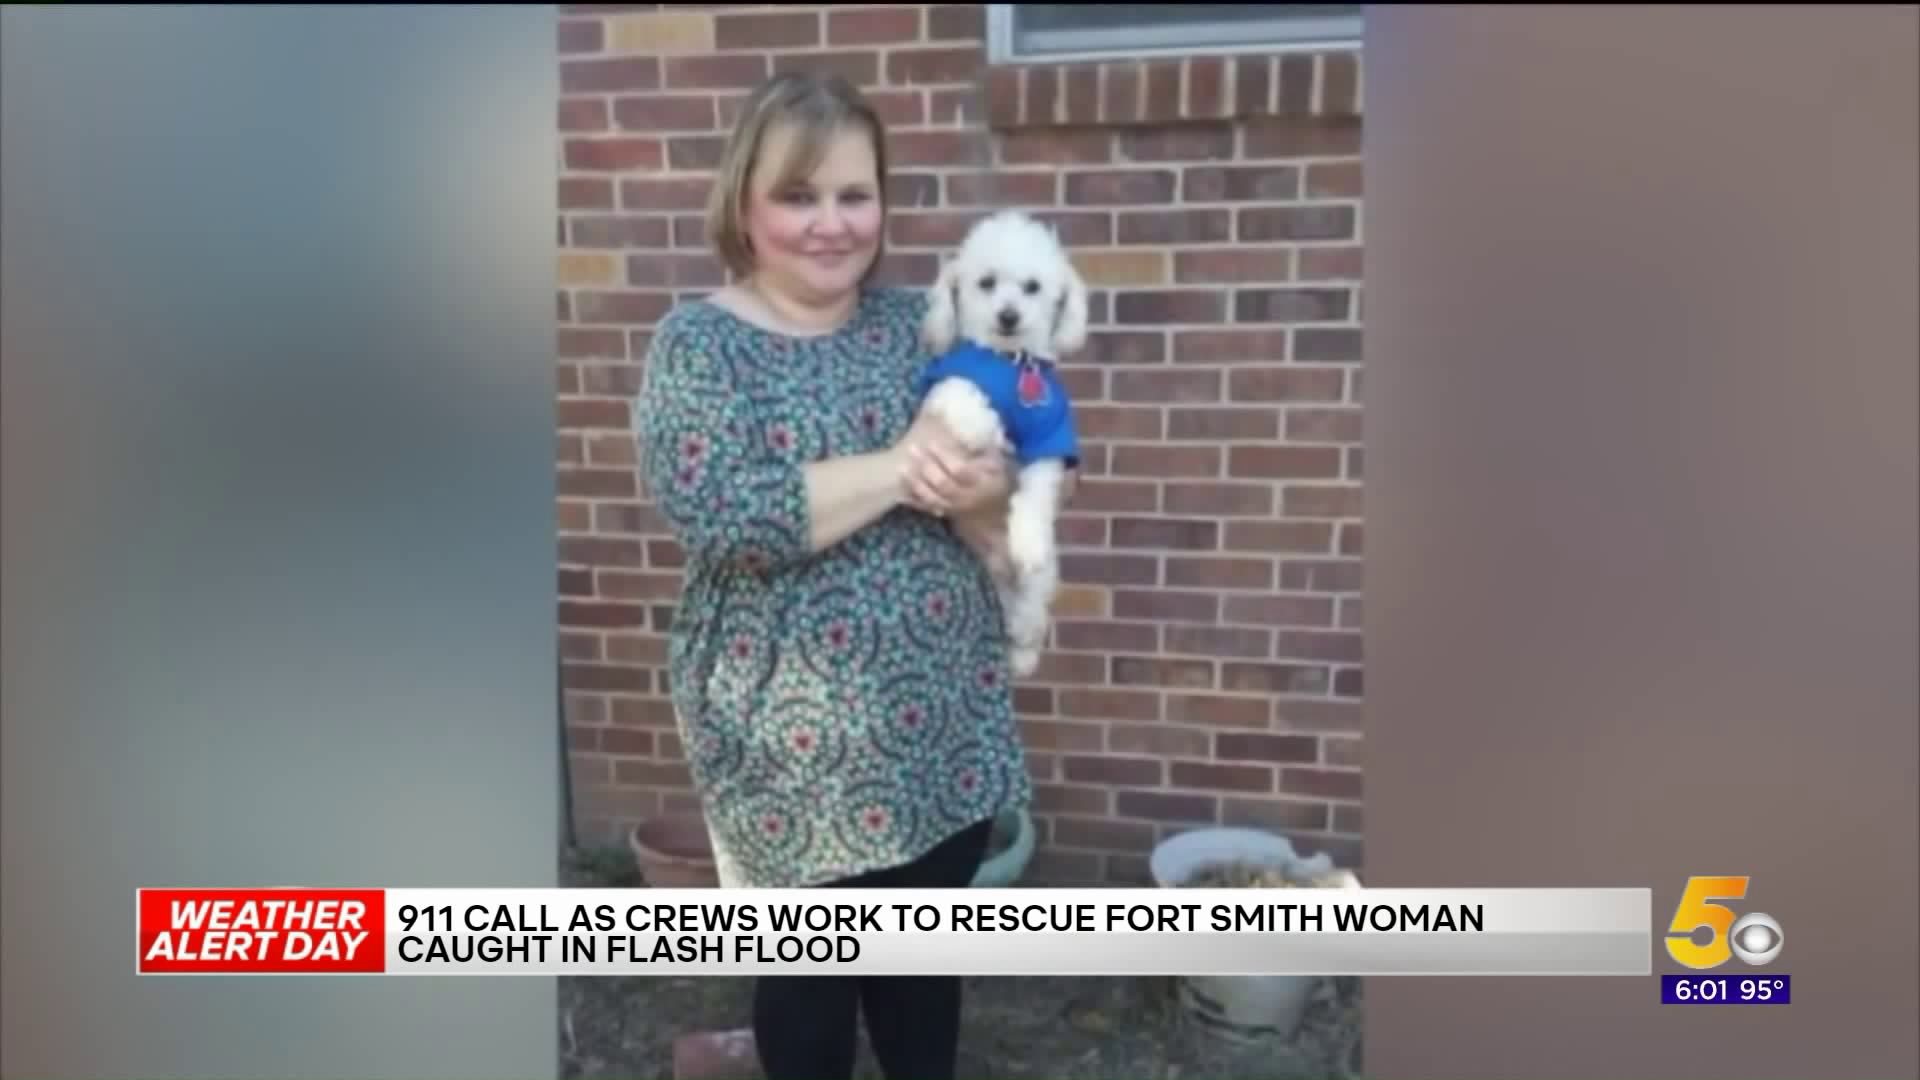 Dispatch Calls Released After Fort Smith Woman Drowns During Flash Flooding